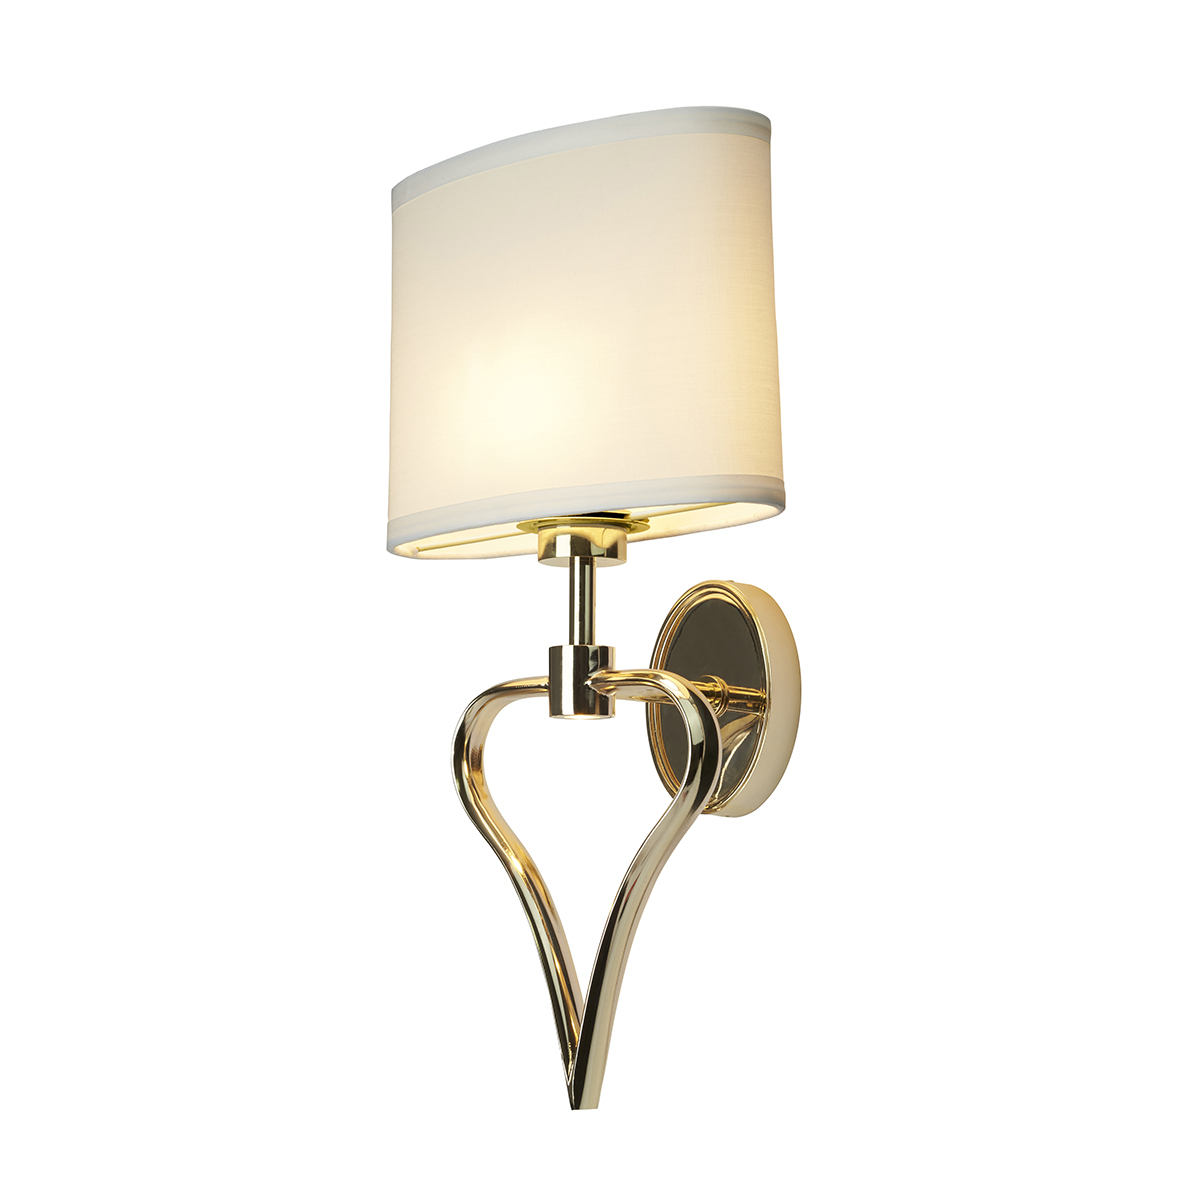 FALMOUTH Led french gold BATH-FALMOUTH-FG Elstead Lighting